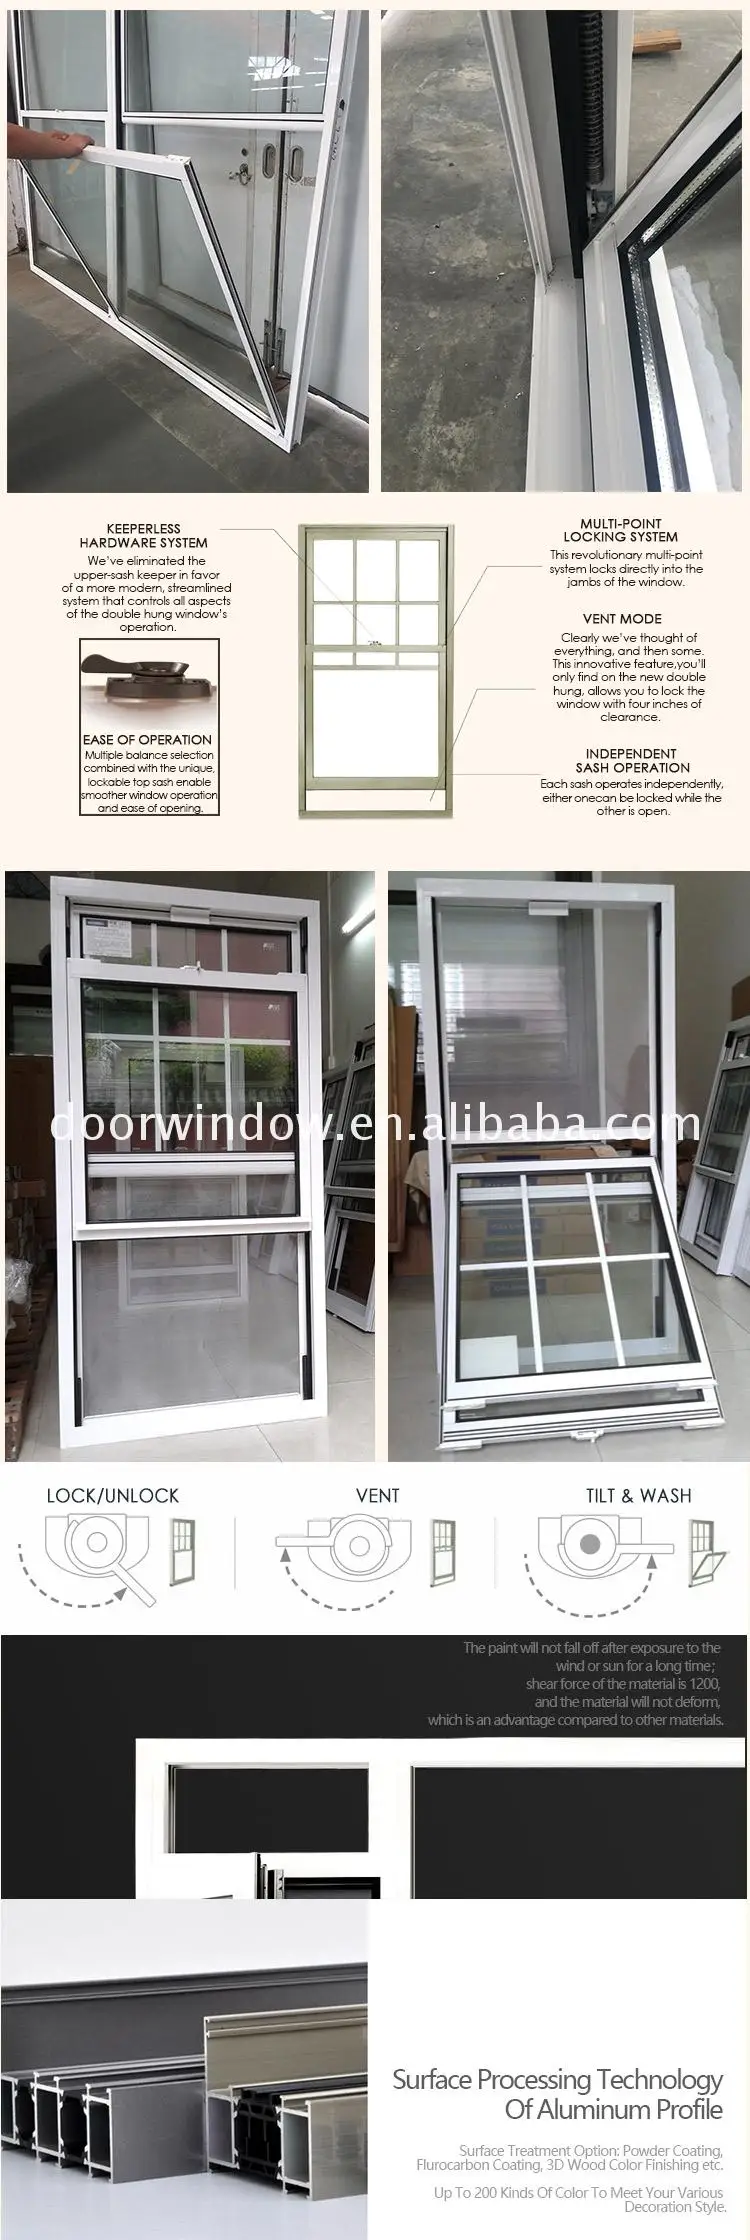 Double hung wooden window single floor to ceiling windows